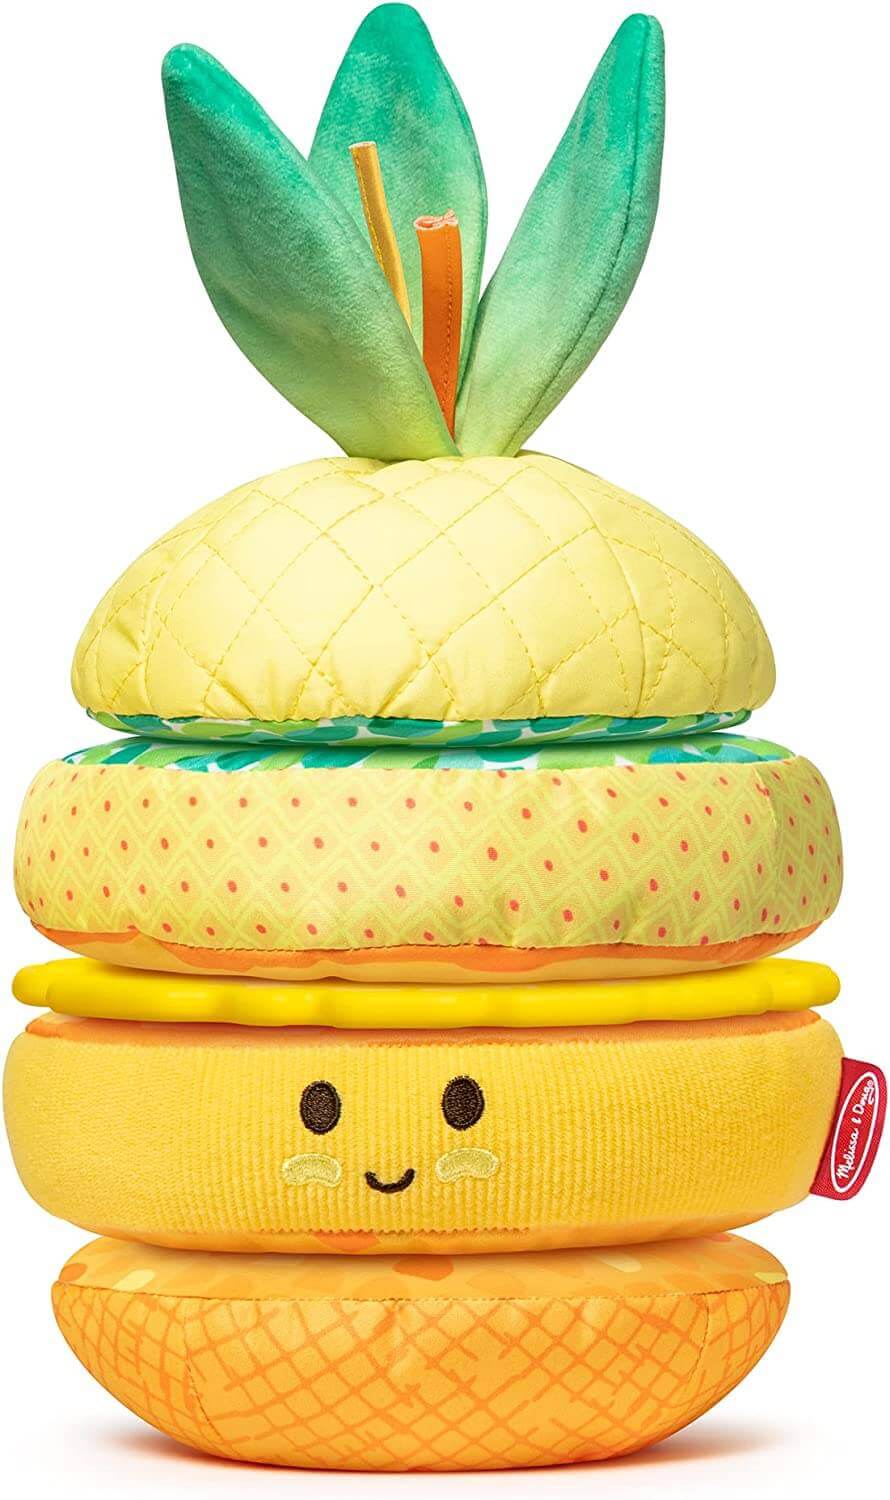 Melissa & Doug Take-Along Clip-On Infant Toy Style: Pineapple Stacker Baby Toy Earthlets